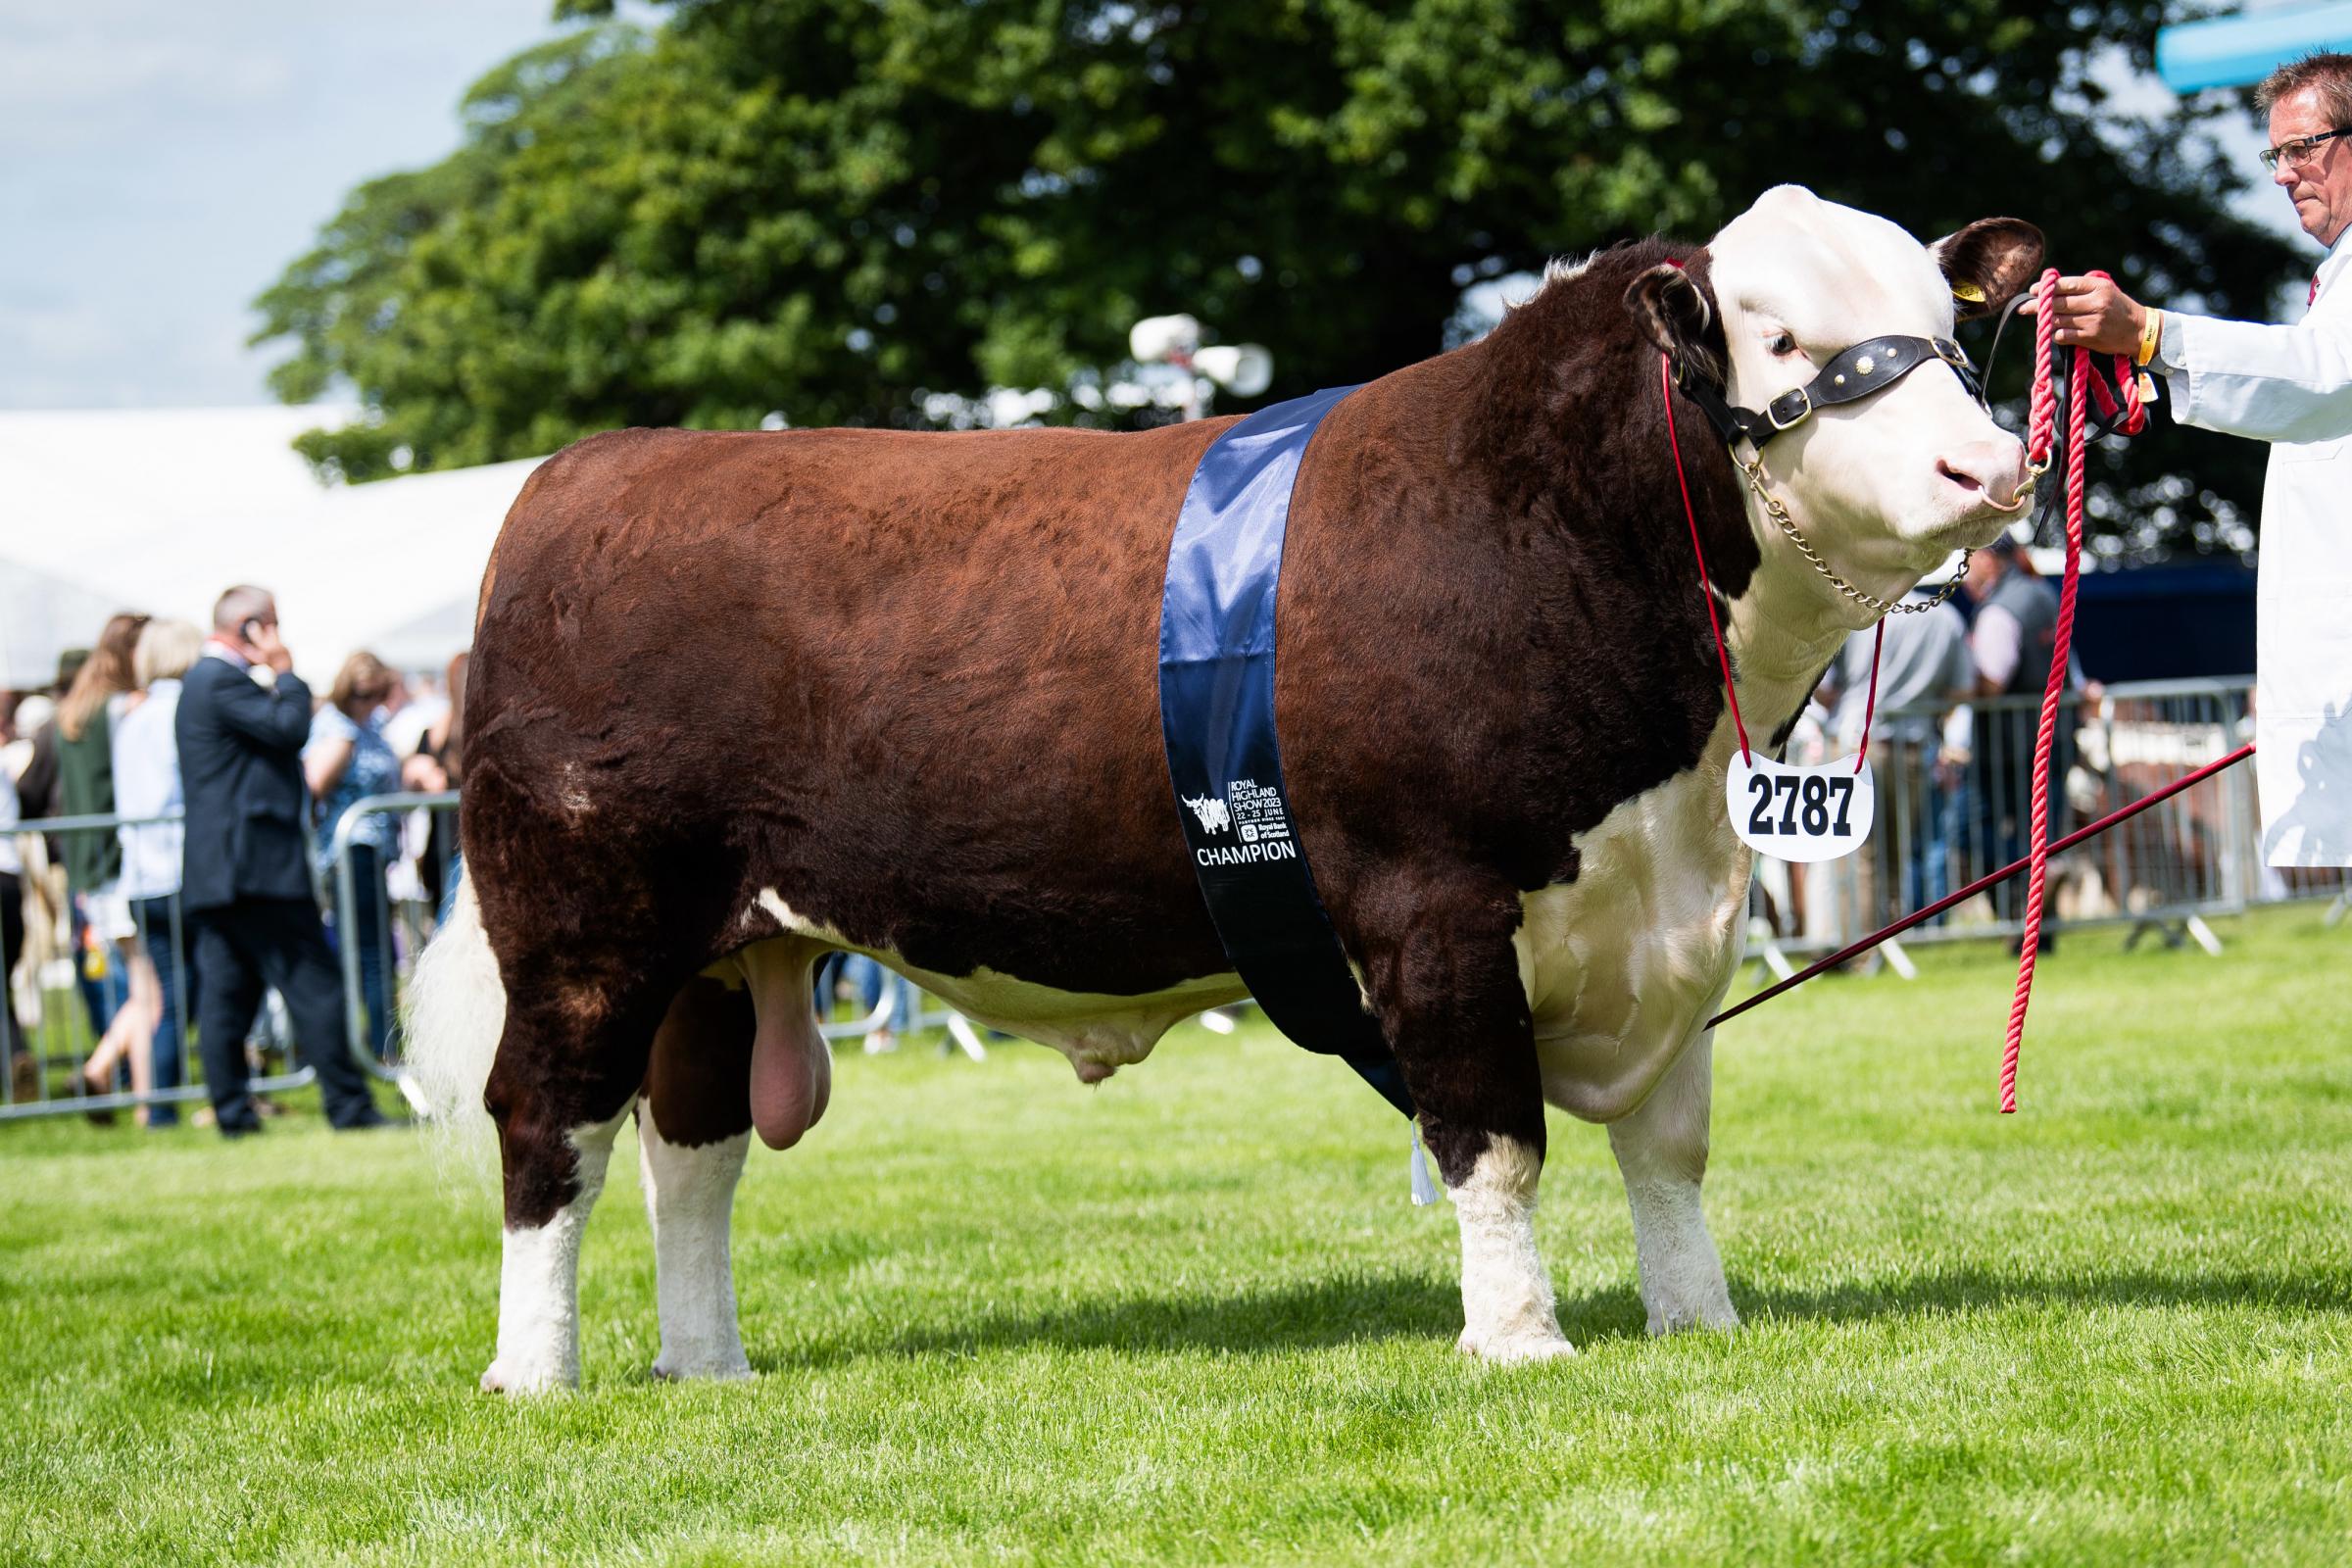 Hereford champion was Coley 1 Vincent from Andrew Hughes Ref:RH220623049 Rob Haining / The Scottish Farmer...